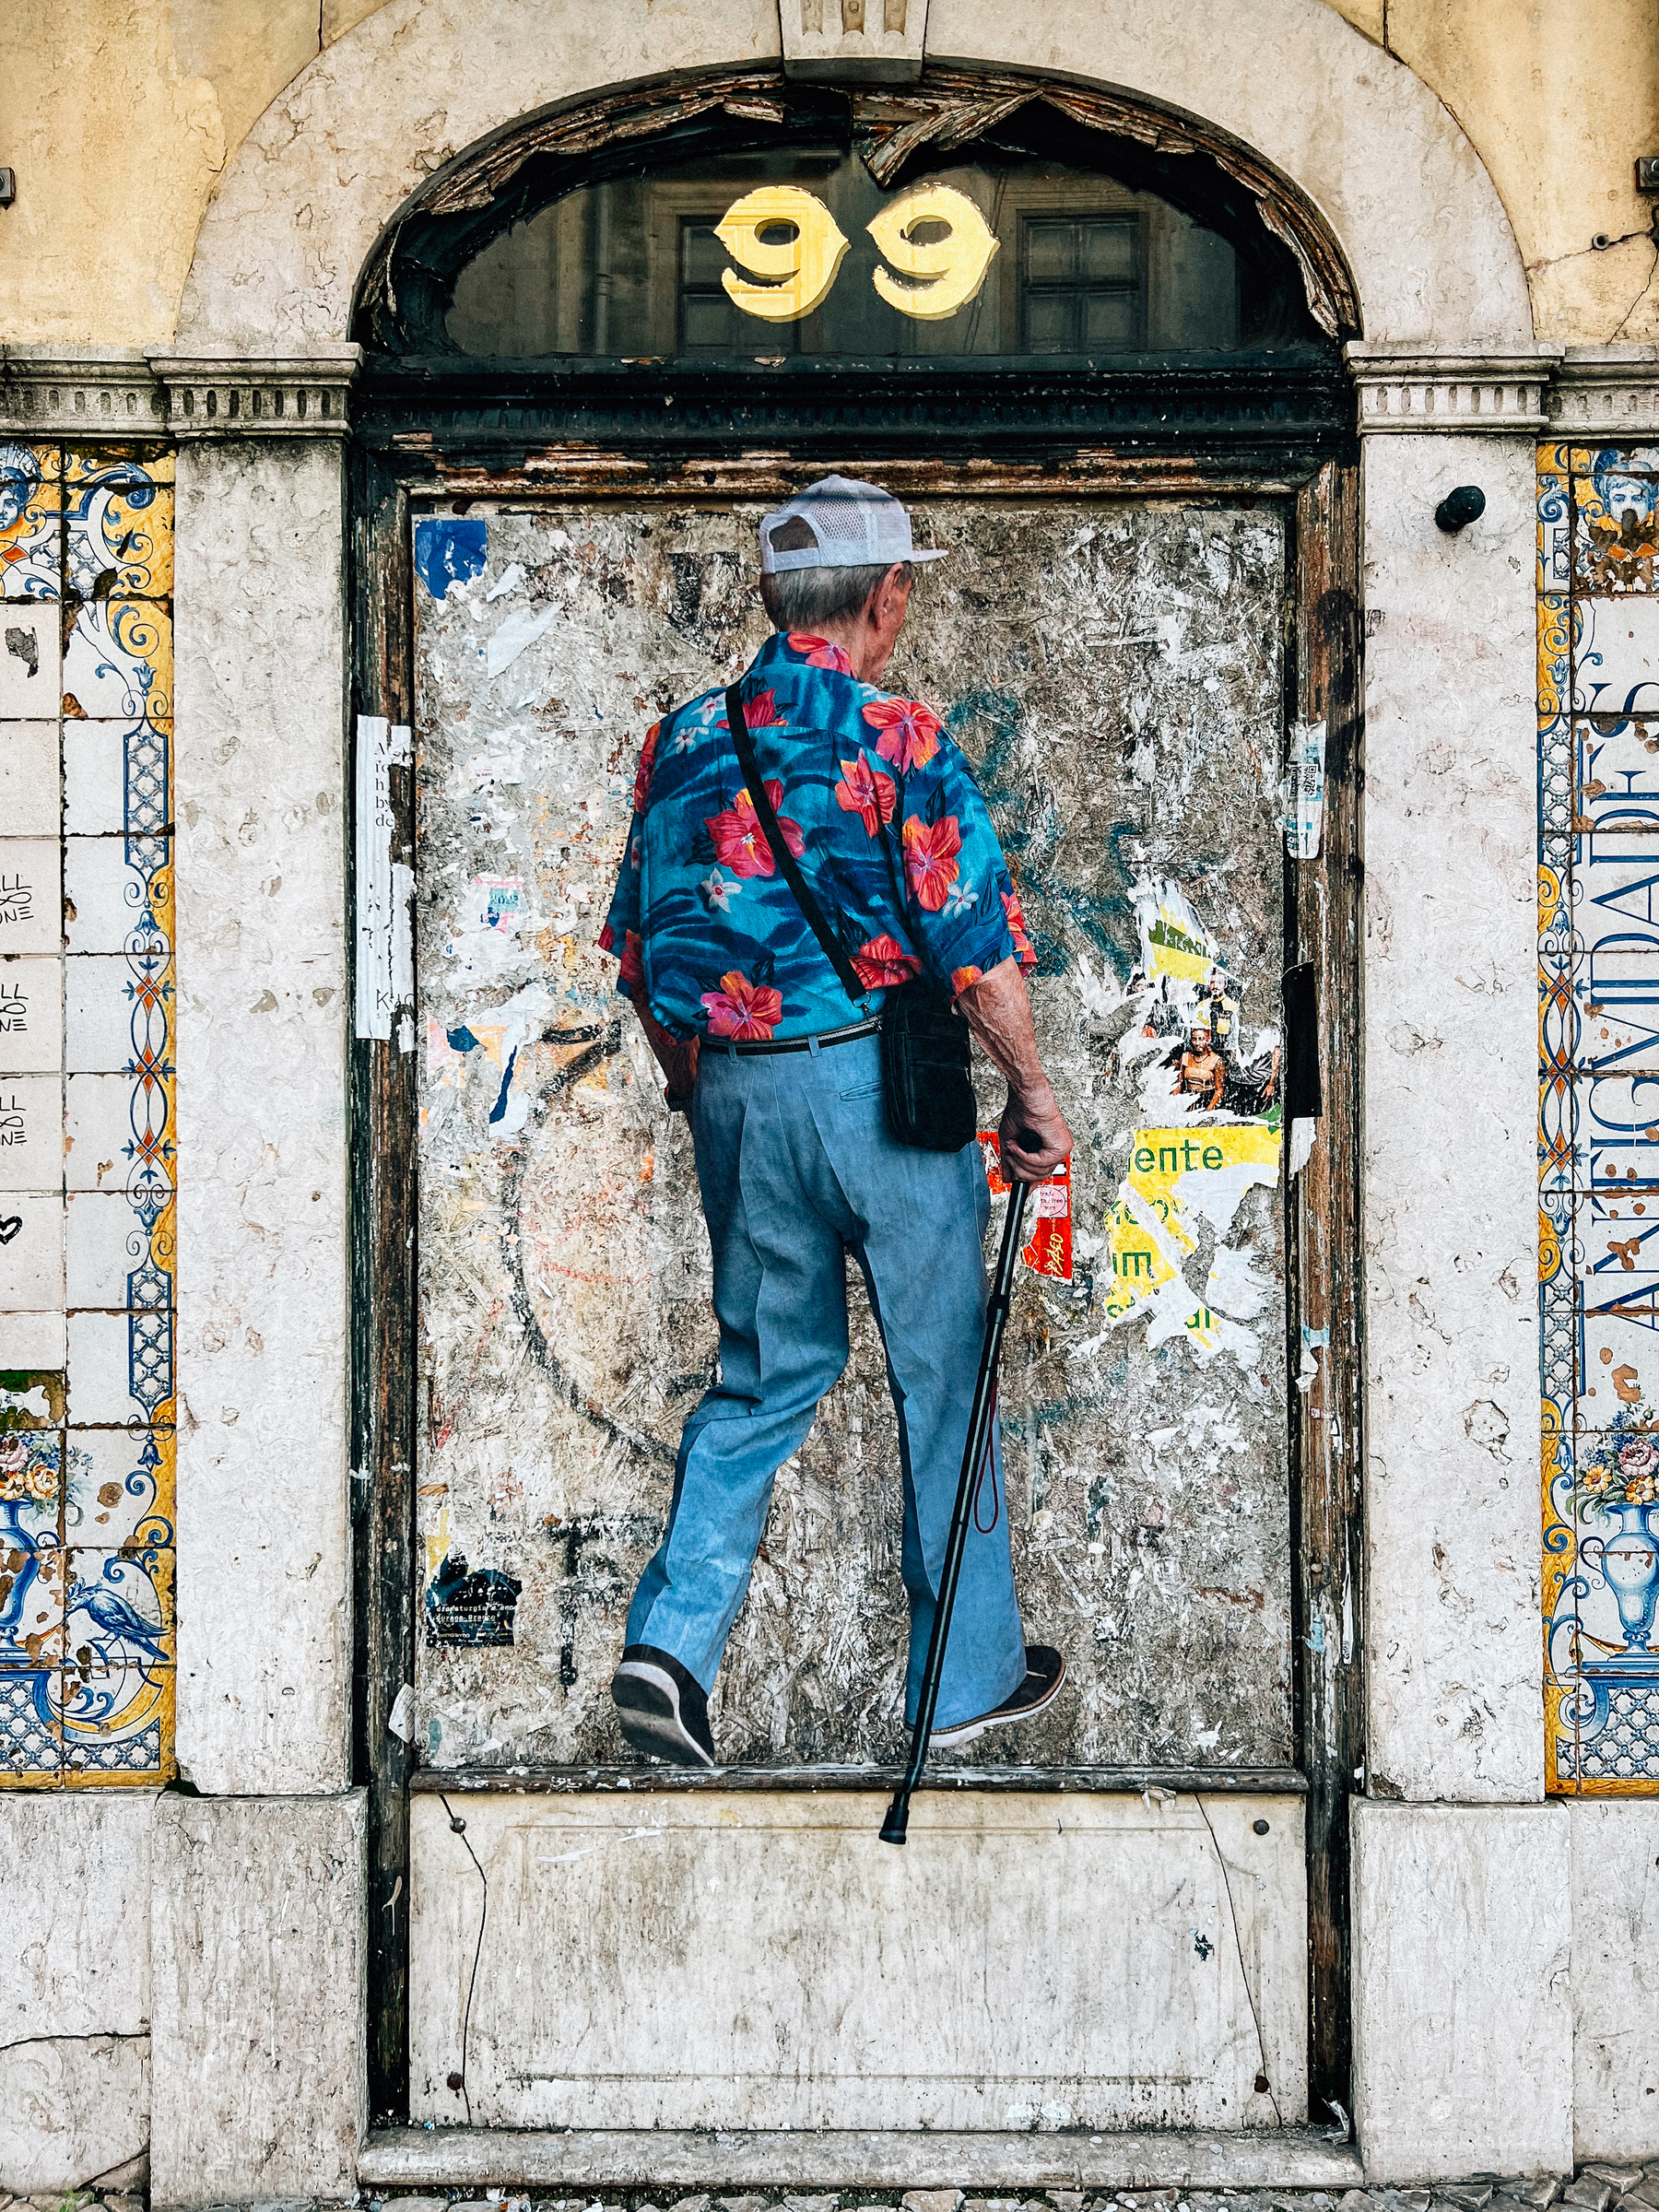 A giant sticker of person with a colorful floral shirt and a walking stick, surrounded by decorative tiles.